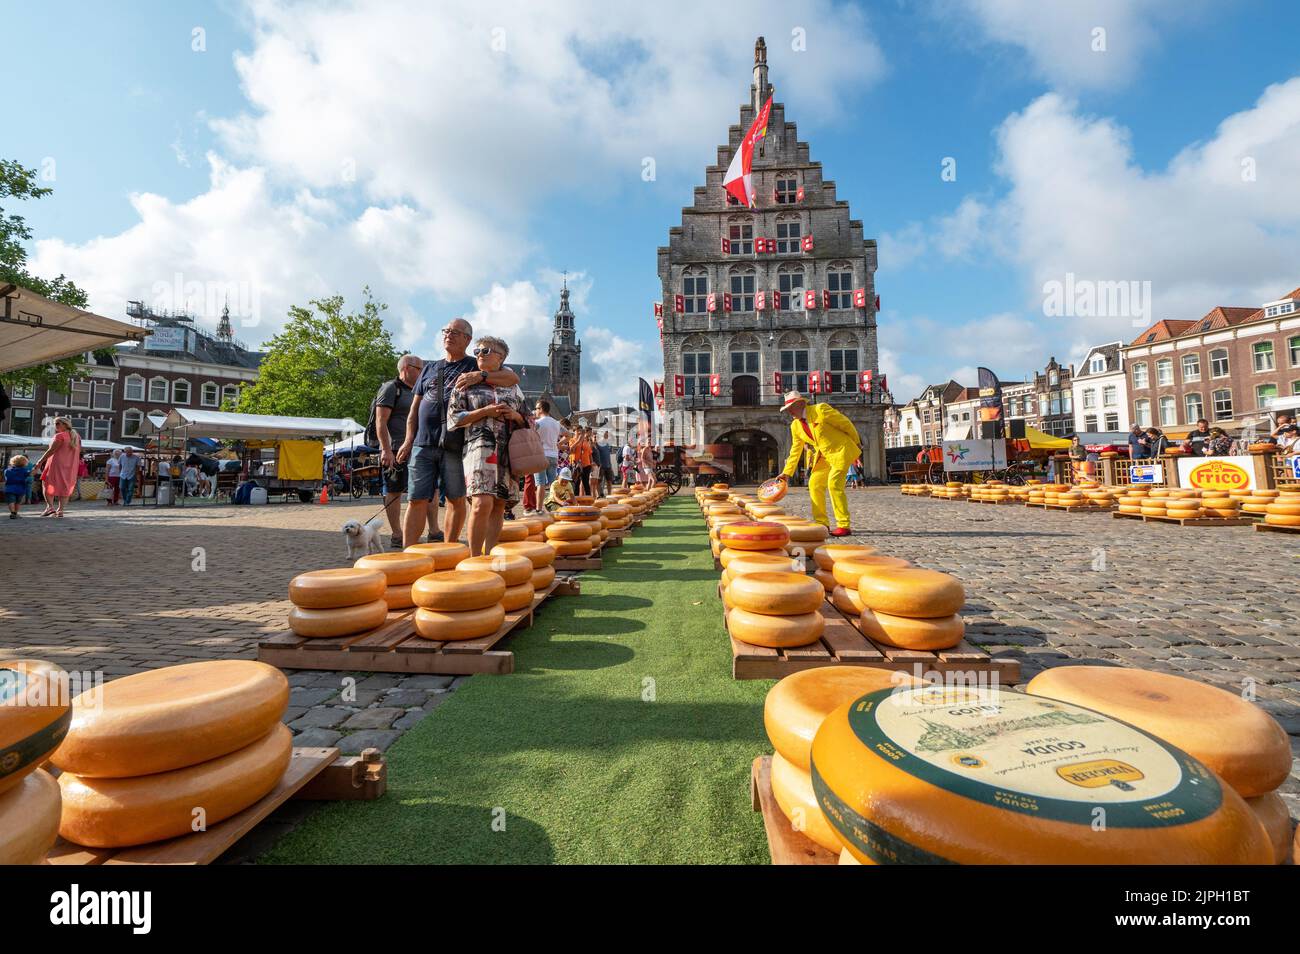 Gouda. The cheese market in Gouda is a tourist attraction. Stock Photo